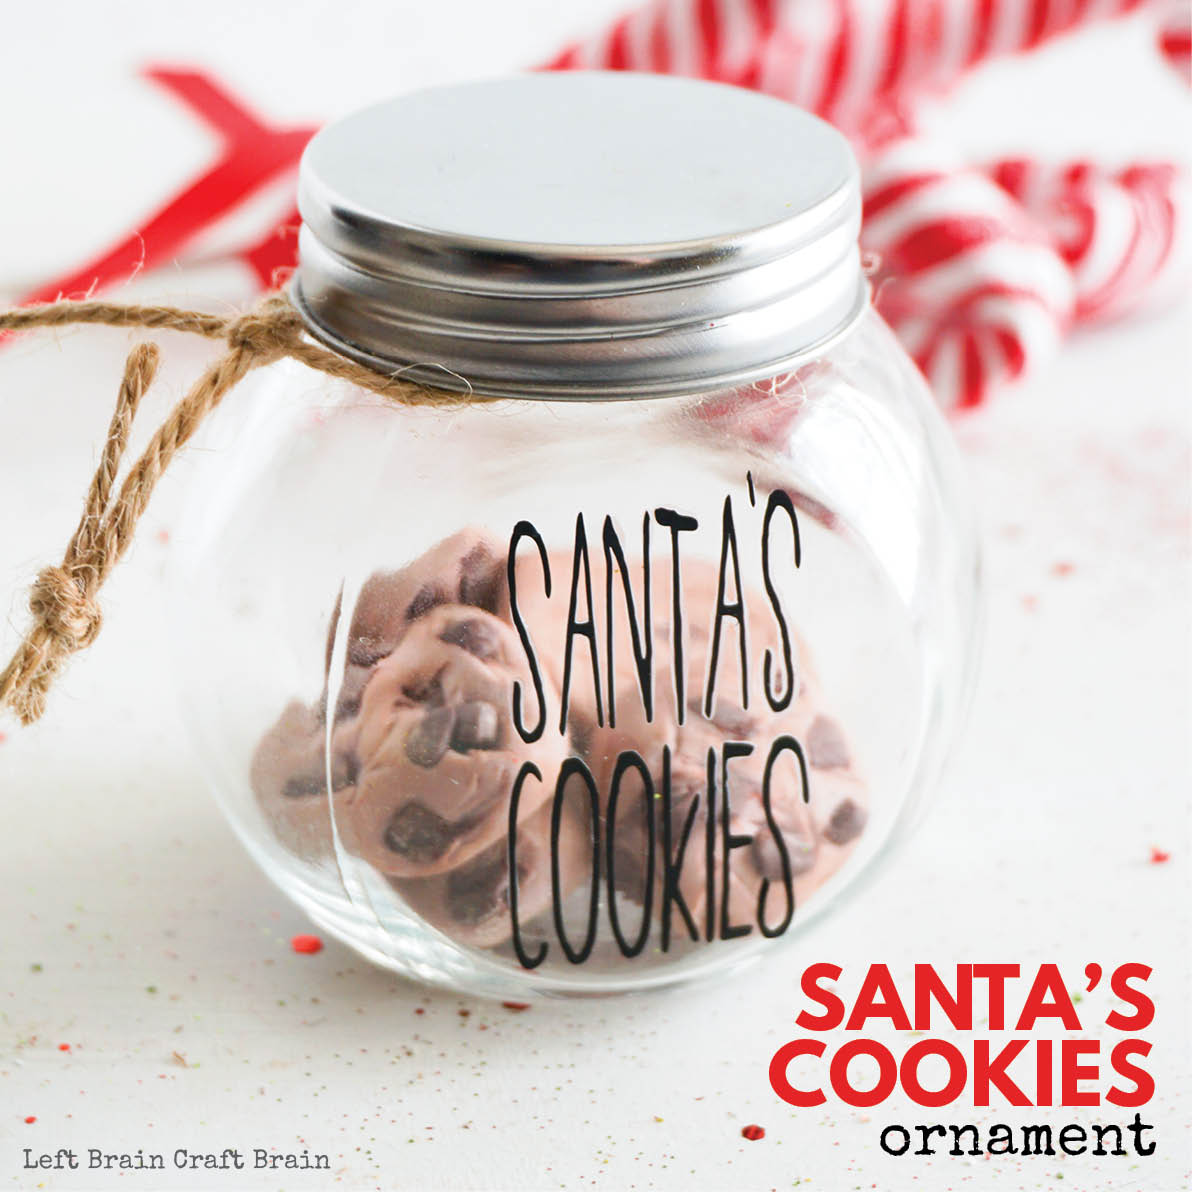 Make this adorable Santa's Cookies DIY Christmas Ornament for a fun gift for the kids or activity to do with the kids. It makes a great gift along with a batch of homemade cookies, too. What a sweet Christmas tradition!